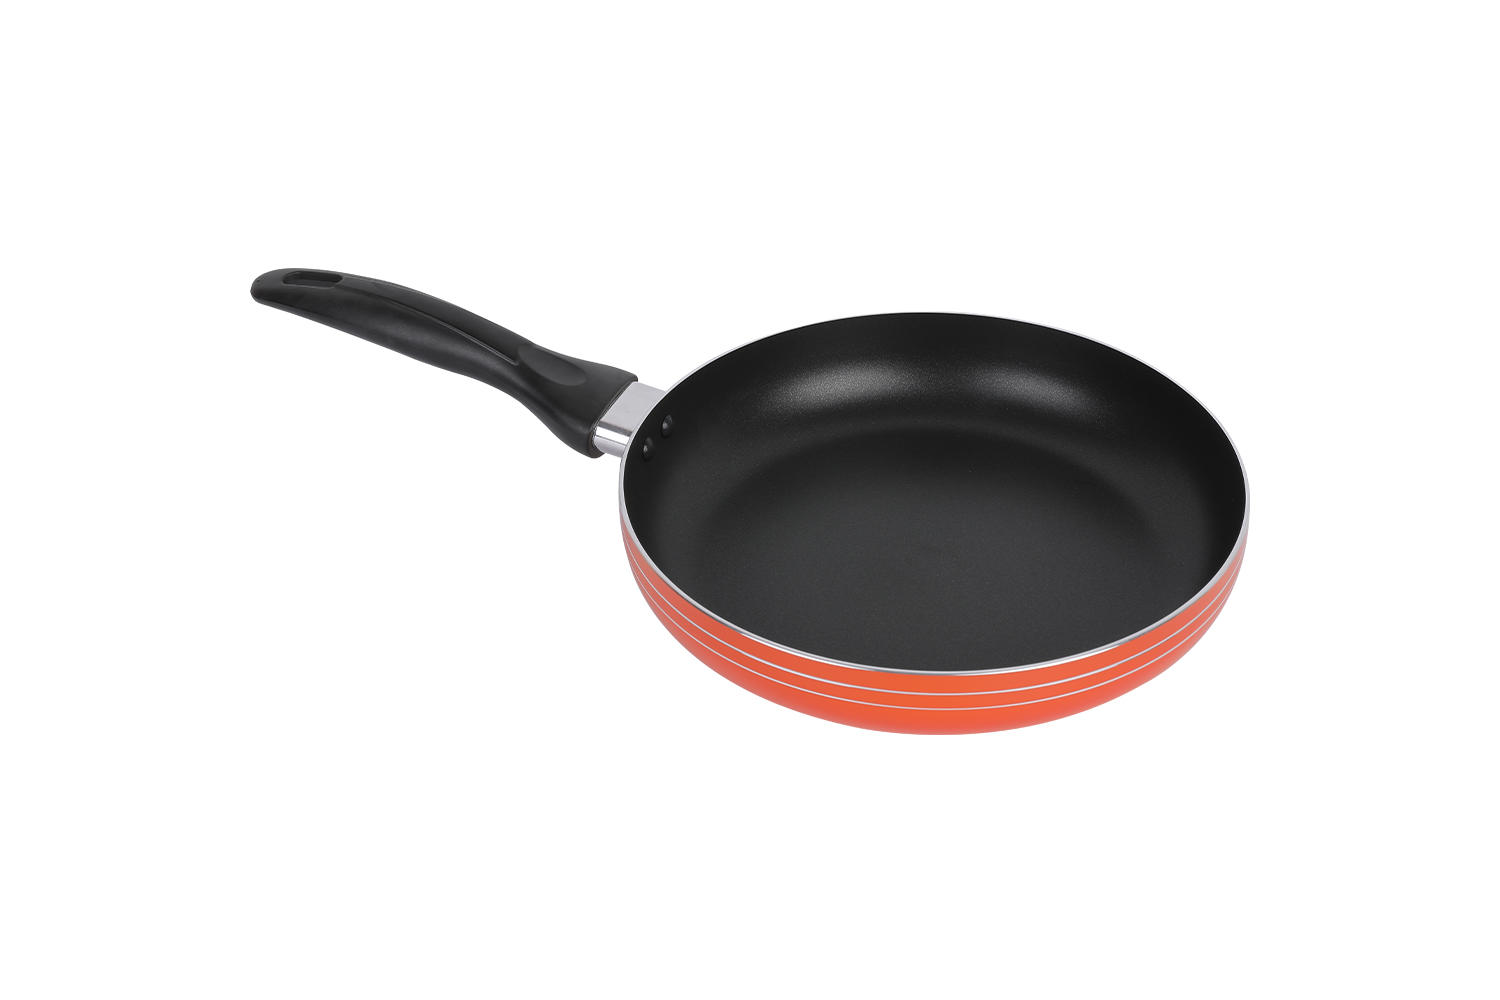 JLW2401 Frying Pan-Without glass lid 24 frying pan, Non stick, household